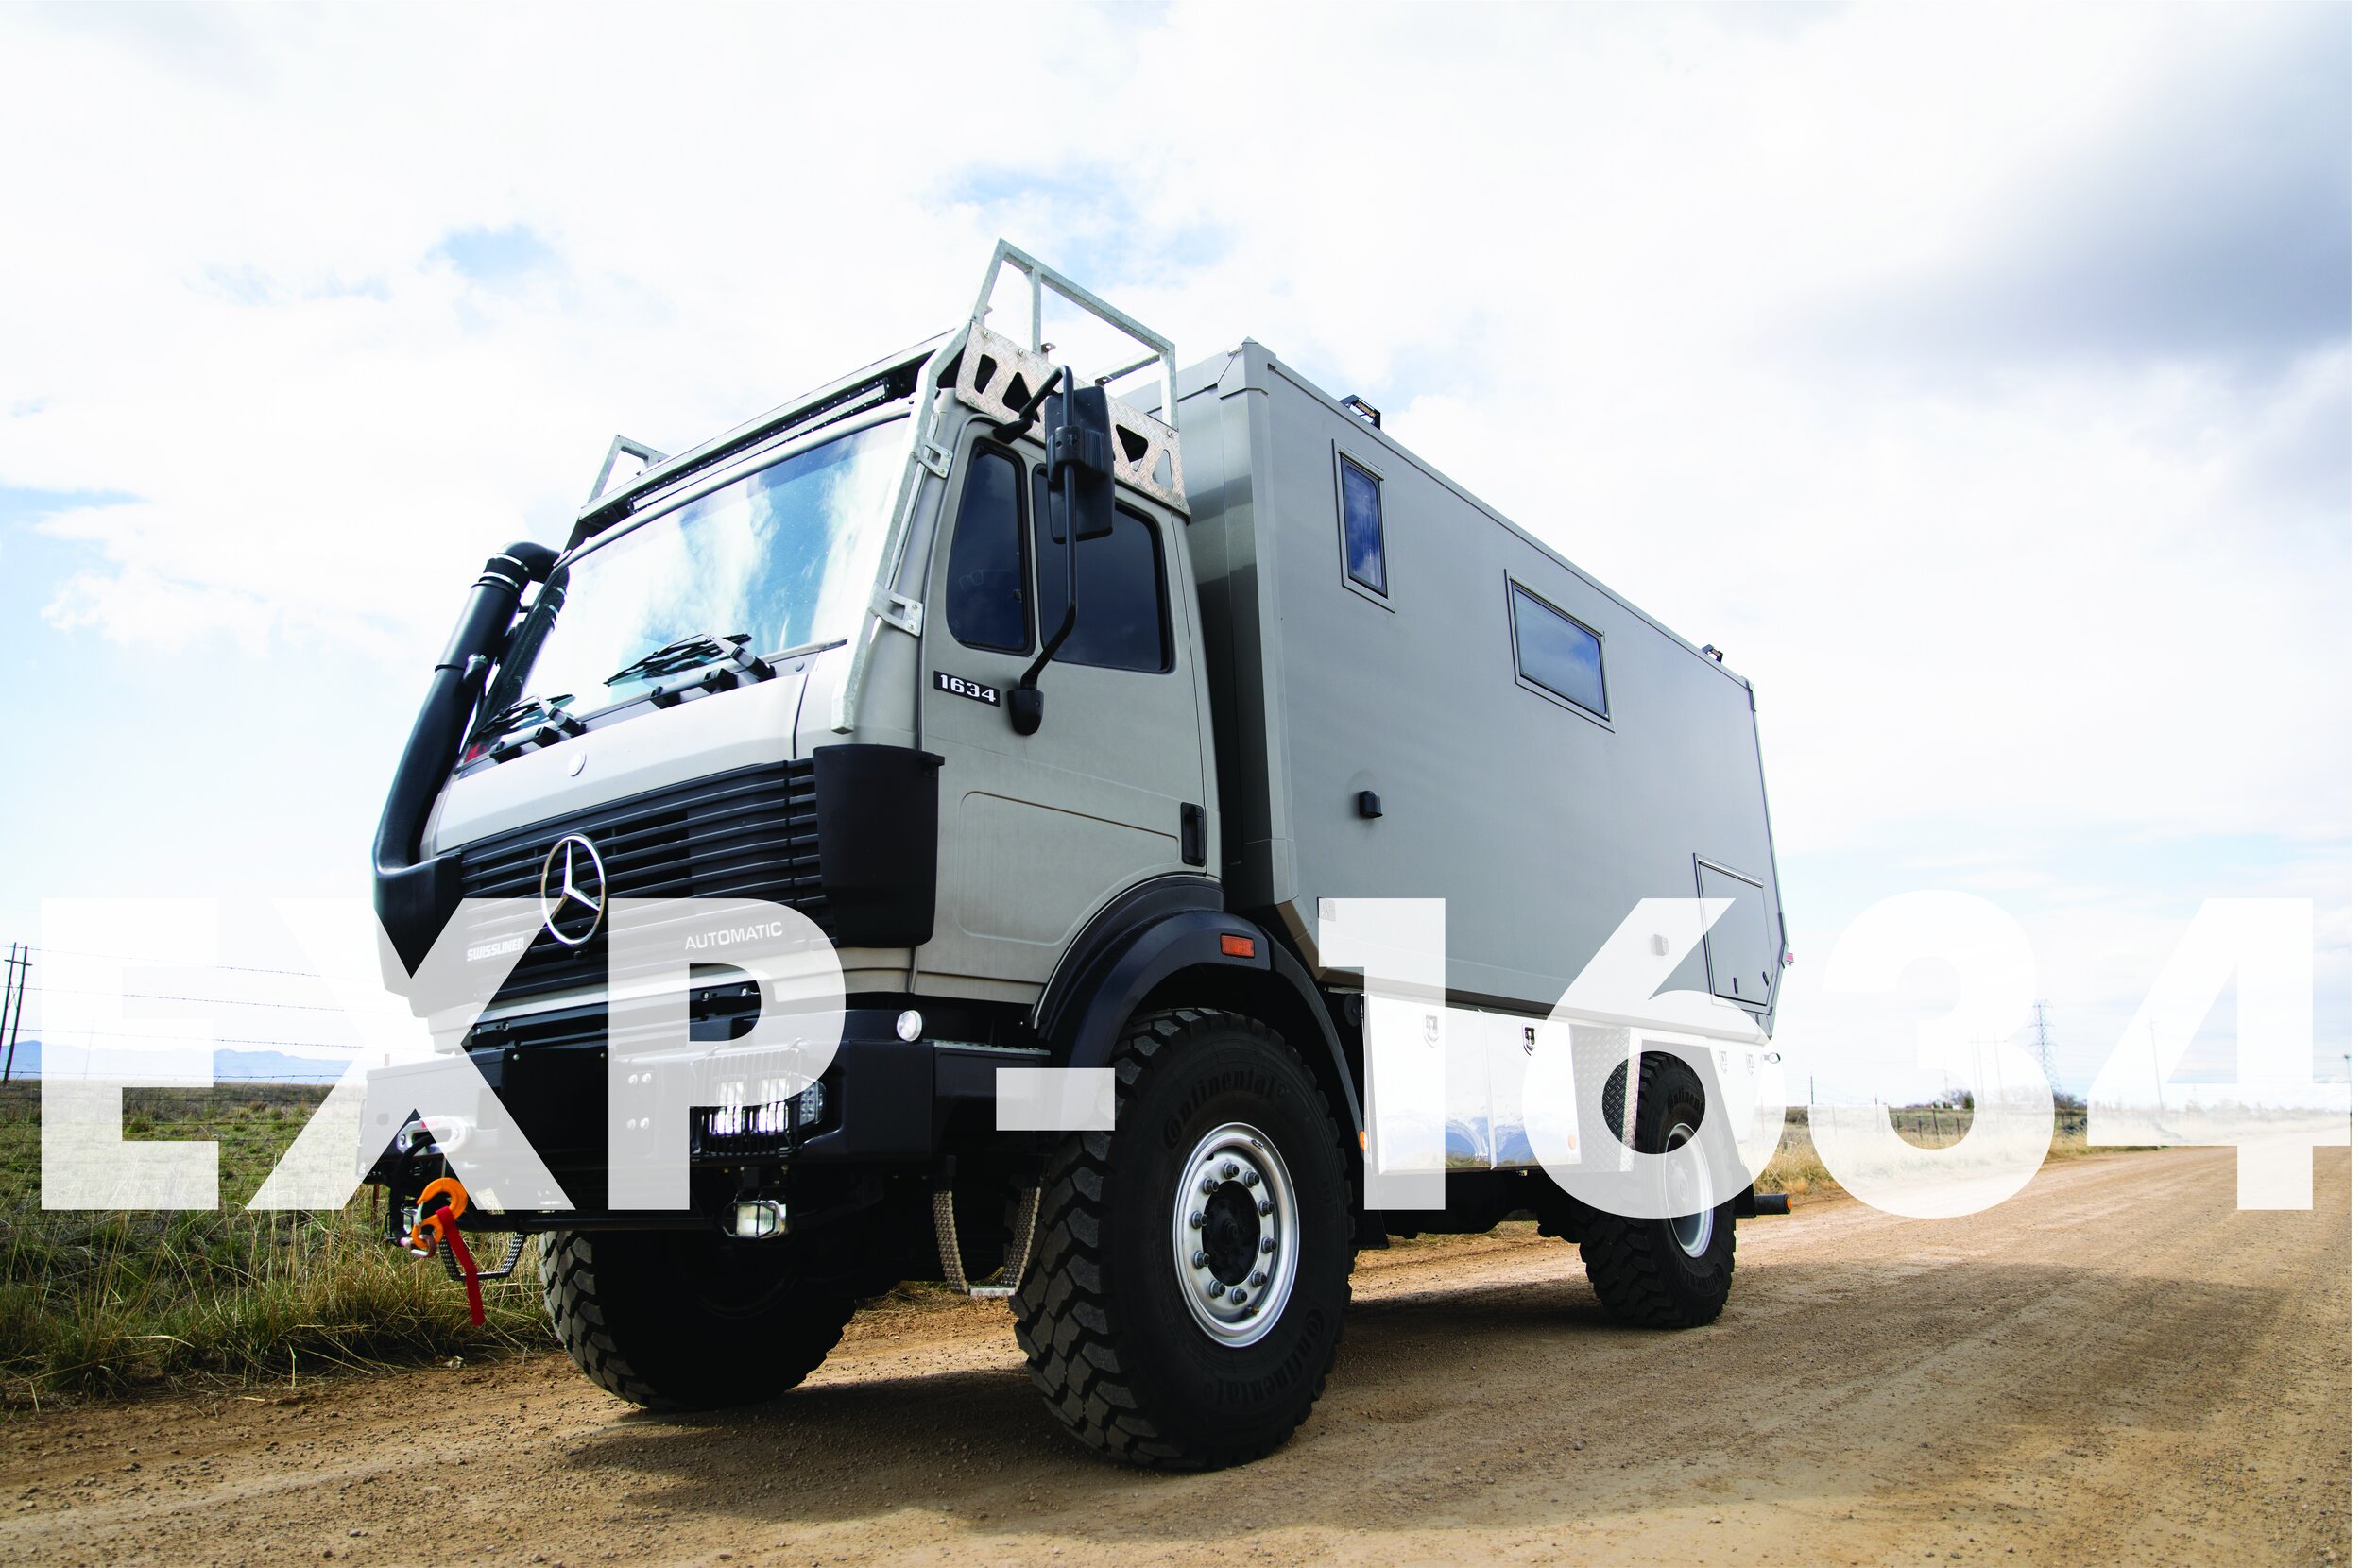 Expedition Truck